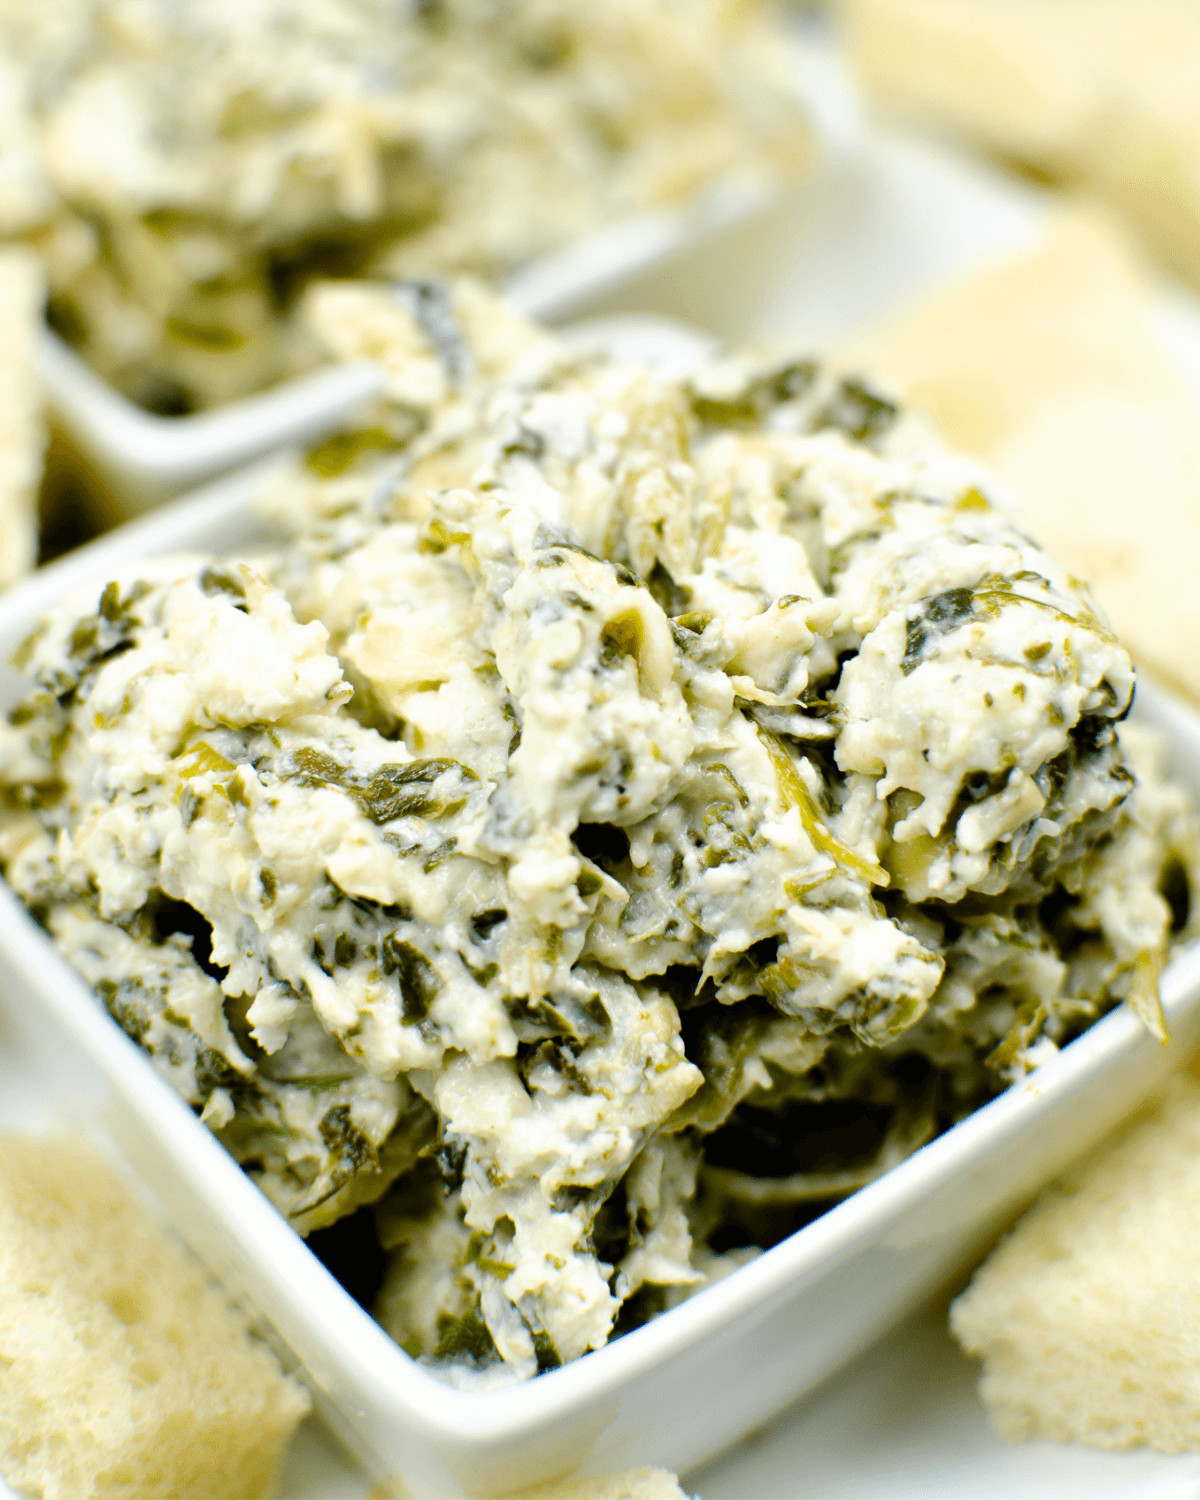 Olive Garden spinach dip with crackers on a white plate.